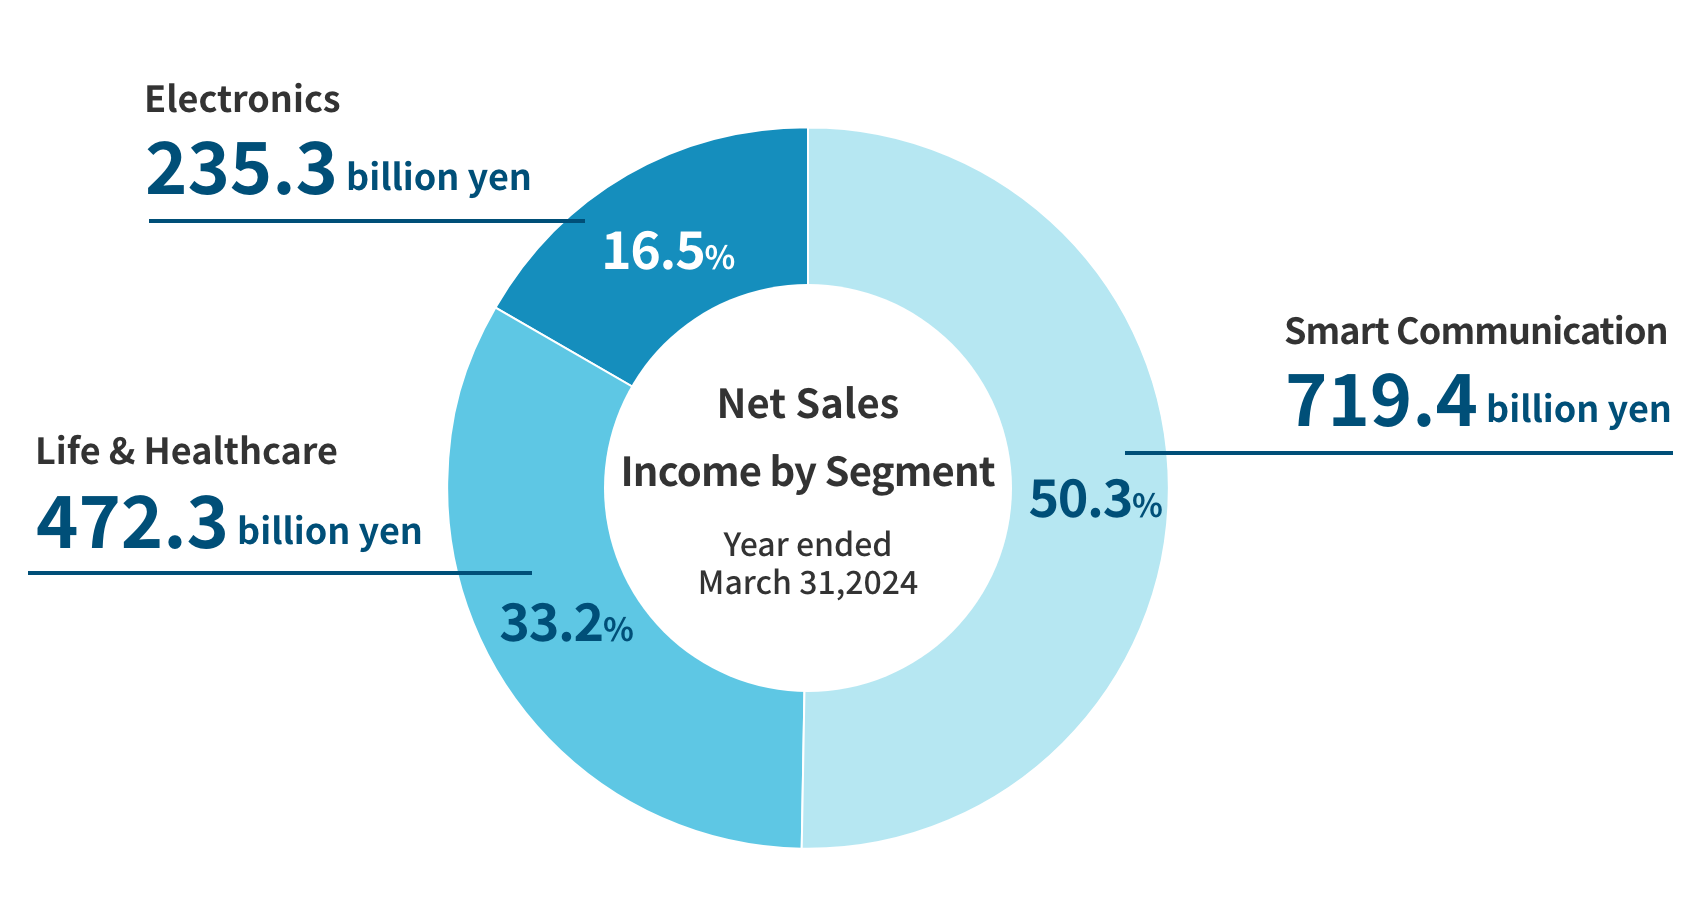 Pie chart showing net sales income by segment for fiscal year ended March 2024. Smart Communication segment account for 50.3% of total sales at 719.4 billion yen, the Life & Healthcare segment account for 33.2% at 472.3 billion yen, and Electronics segment account for 16.5% at 235.3 billion yen.